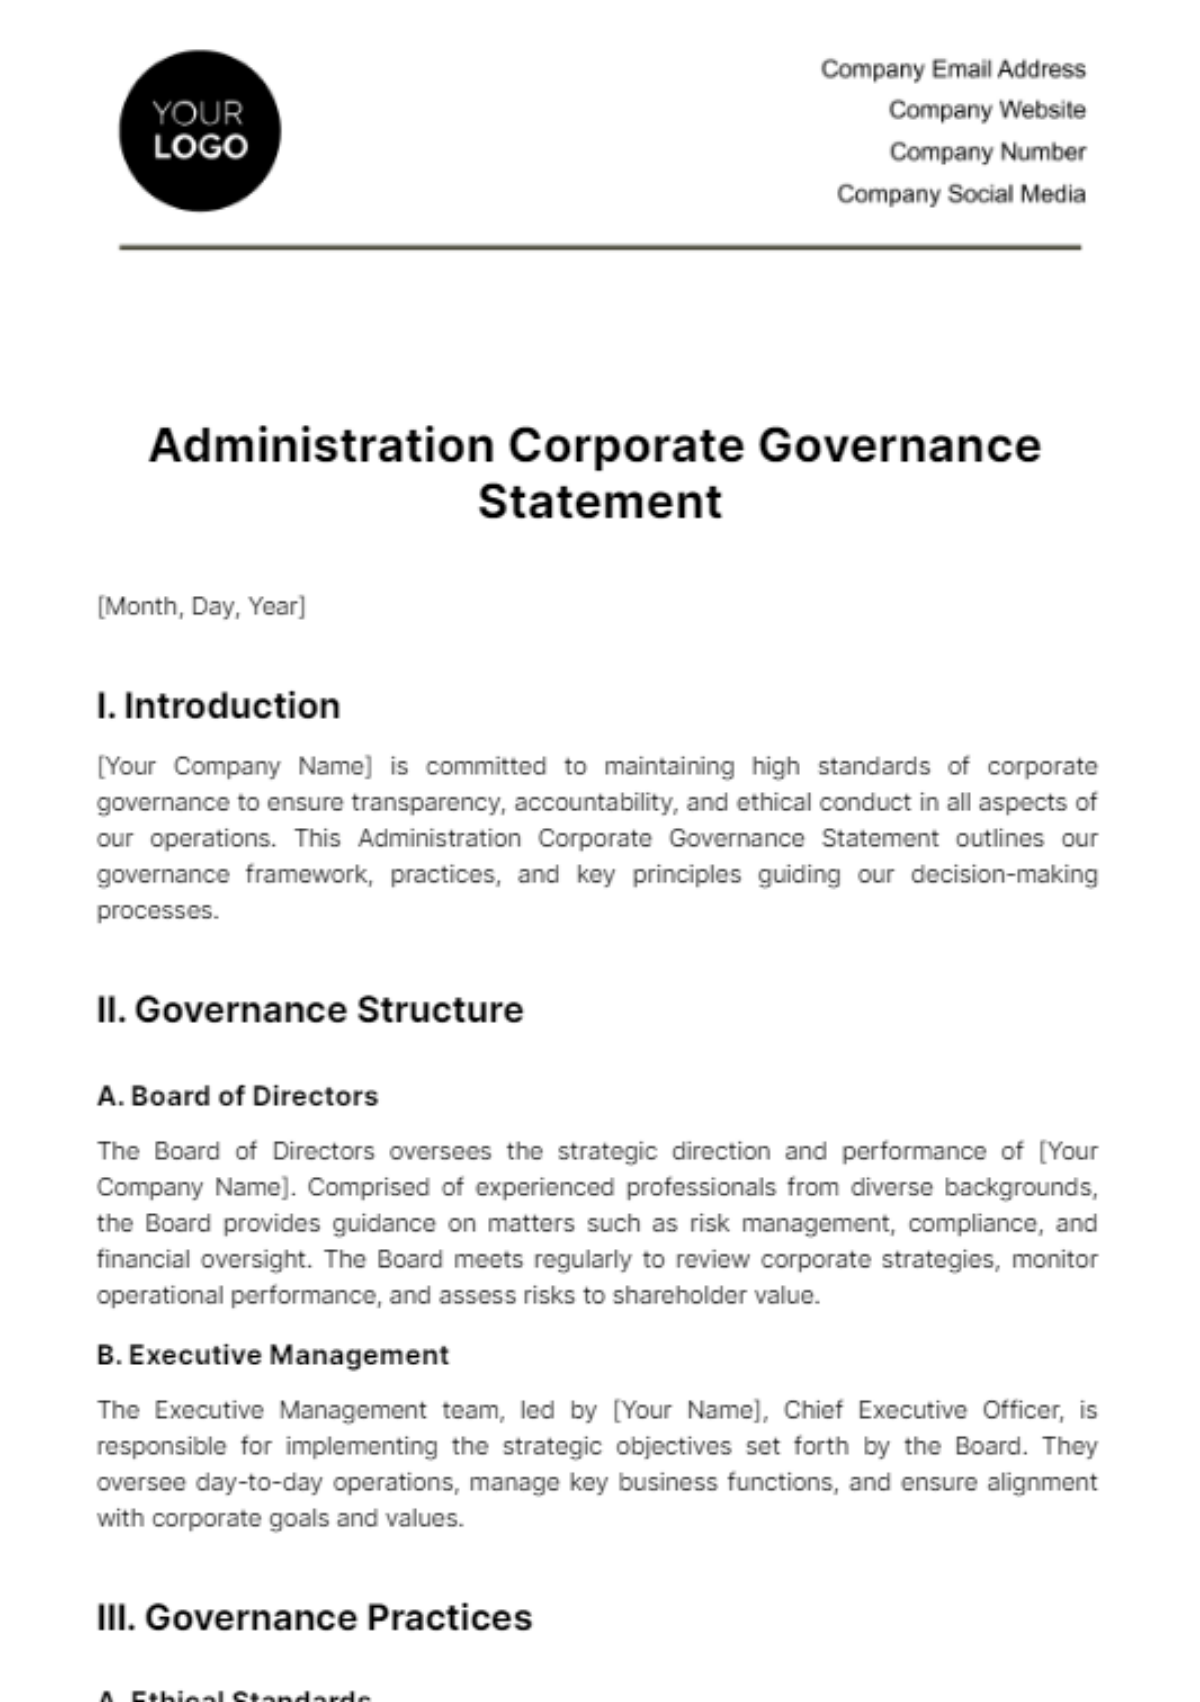 Administration Corporate Governance Statement Template